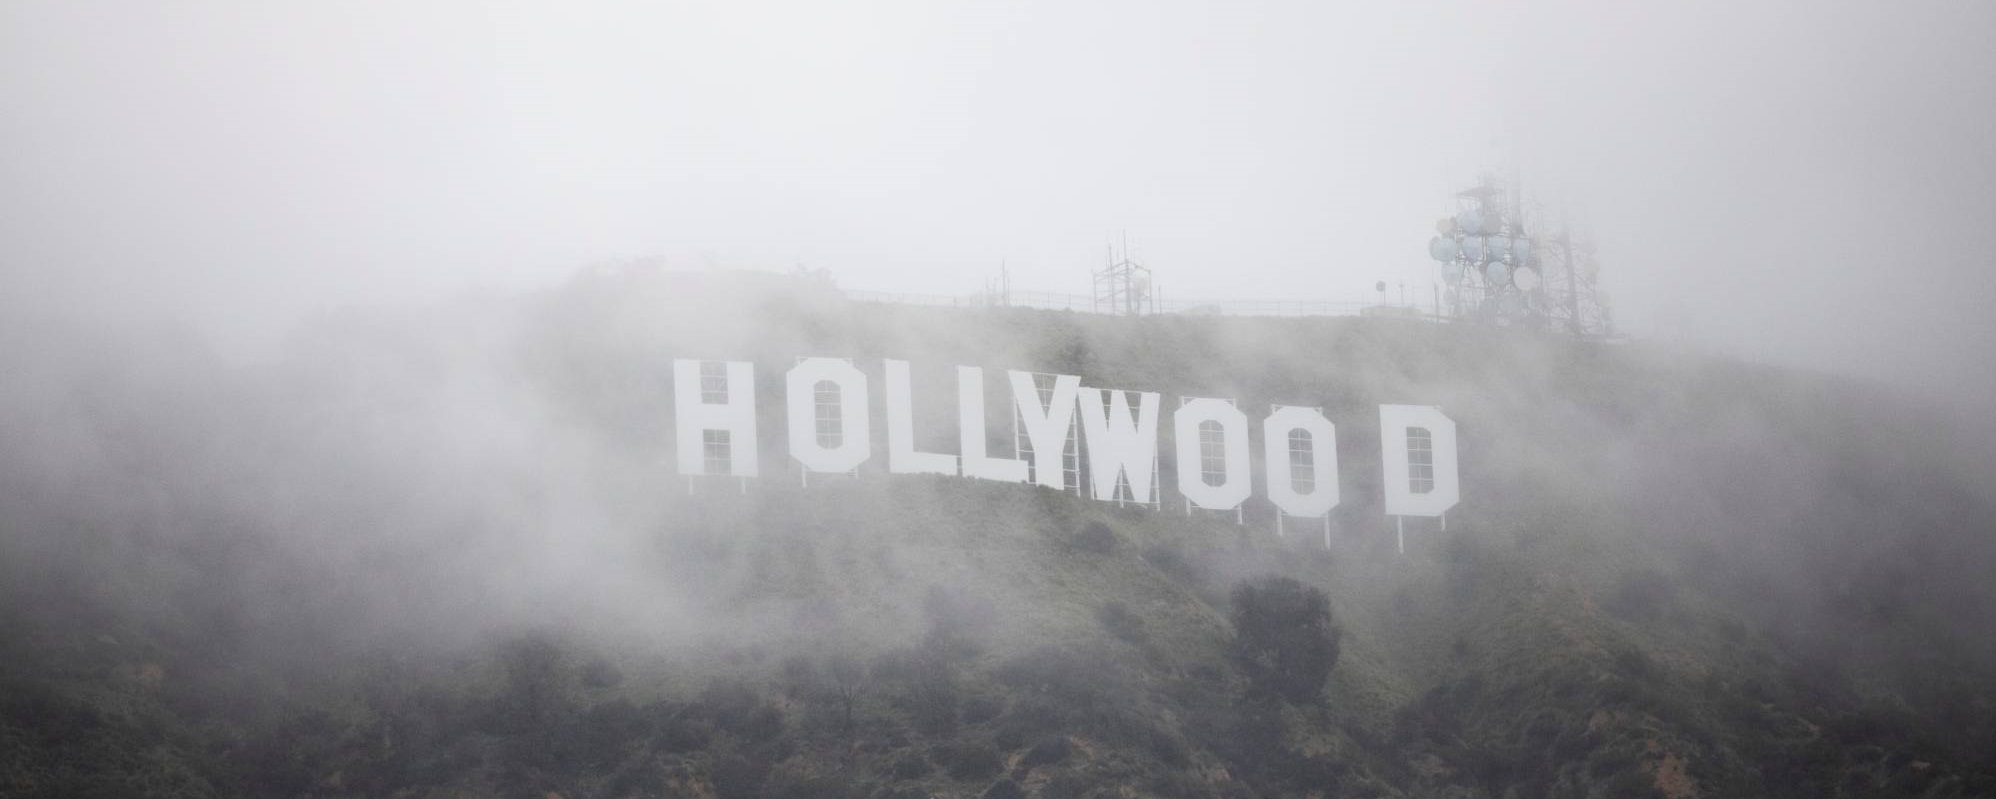 Hollywood producing ‘crap’ for last 15 years